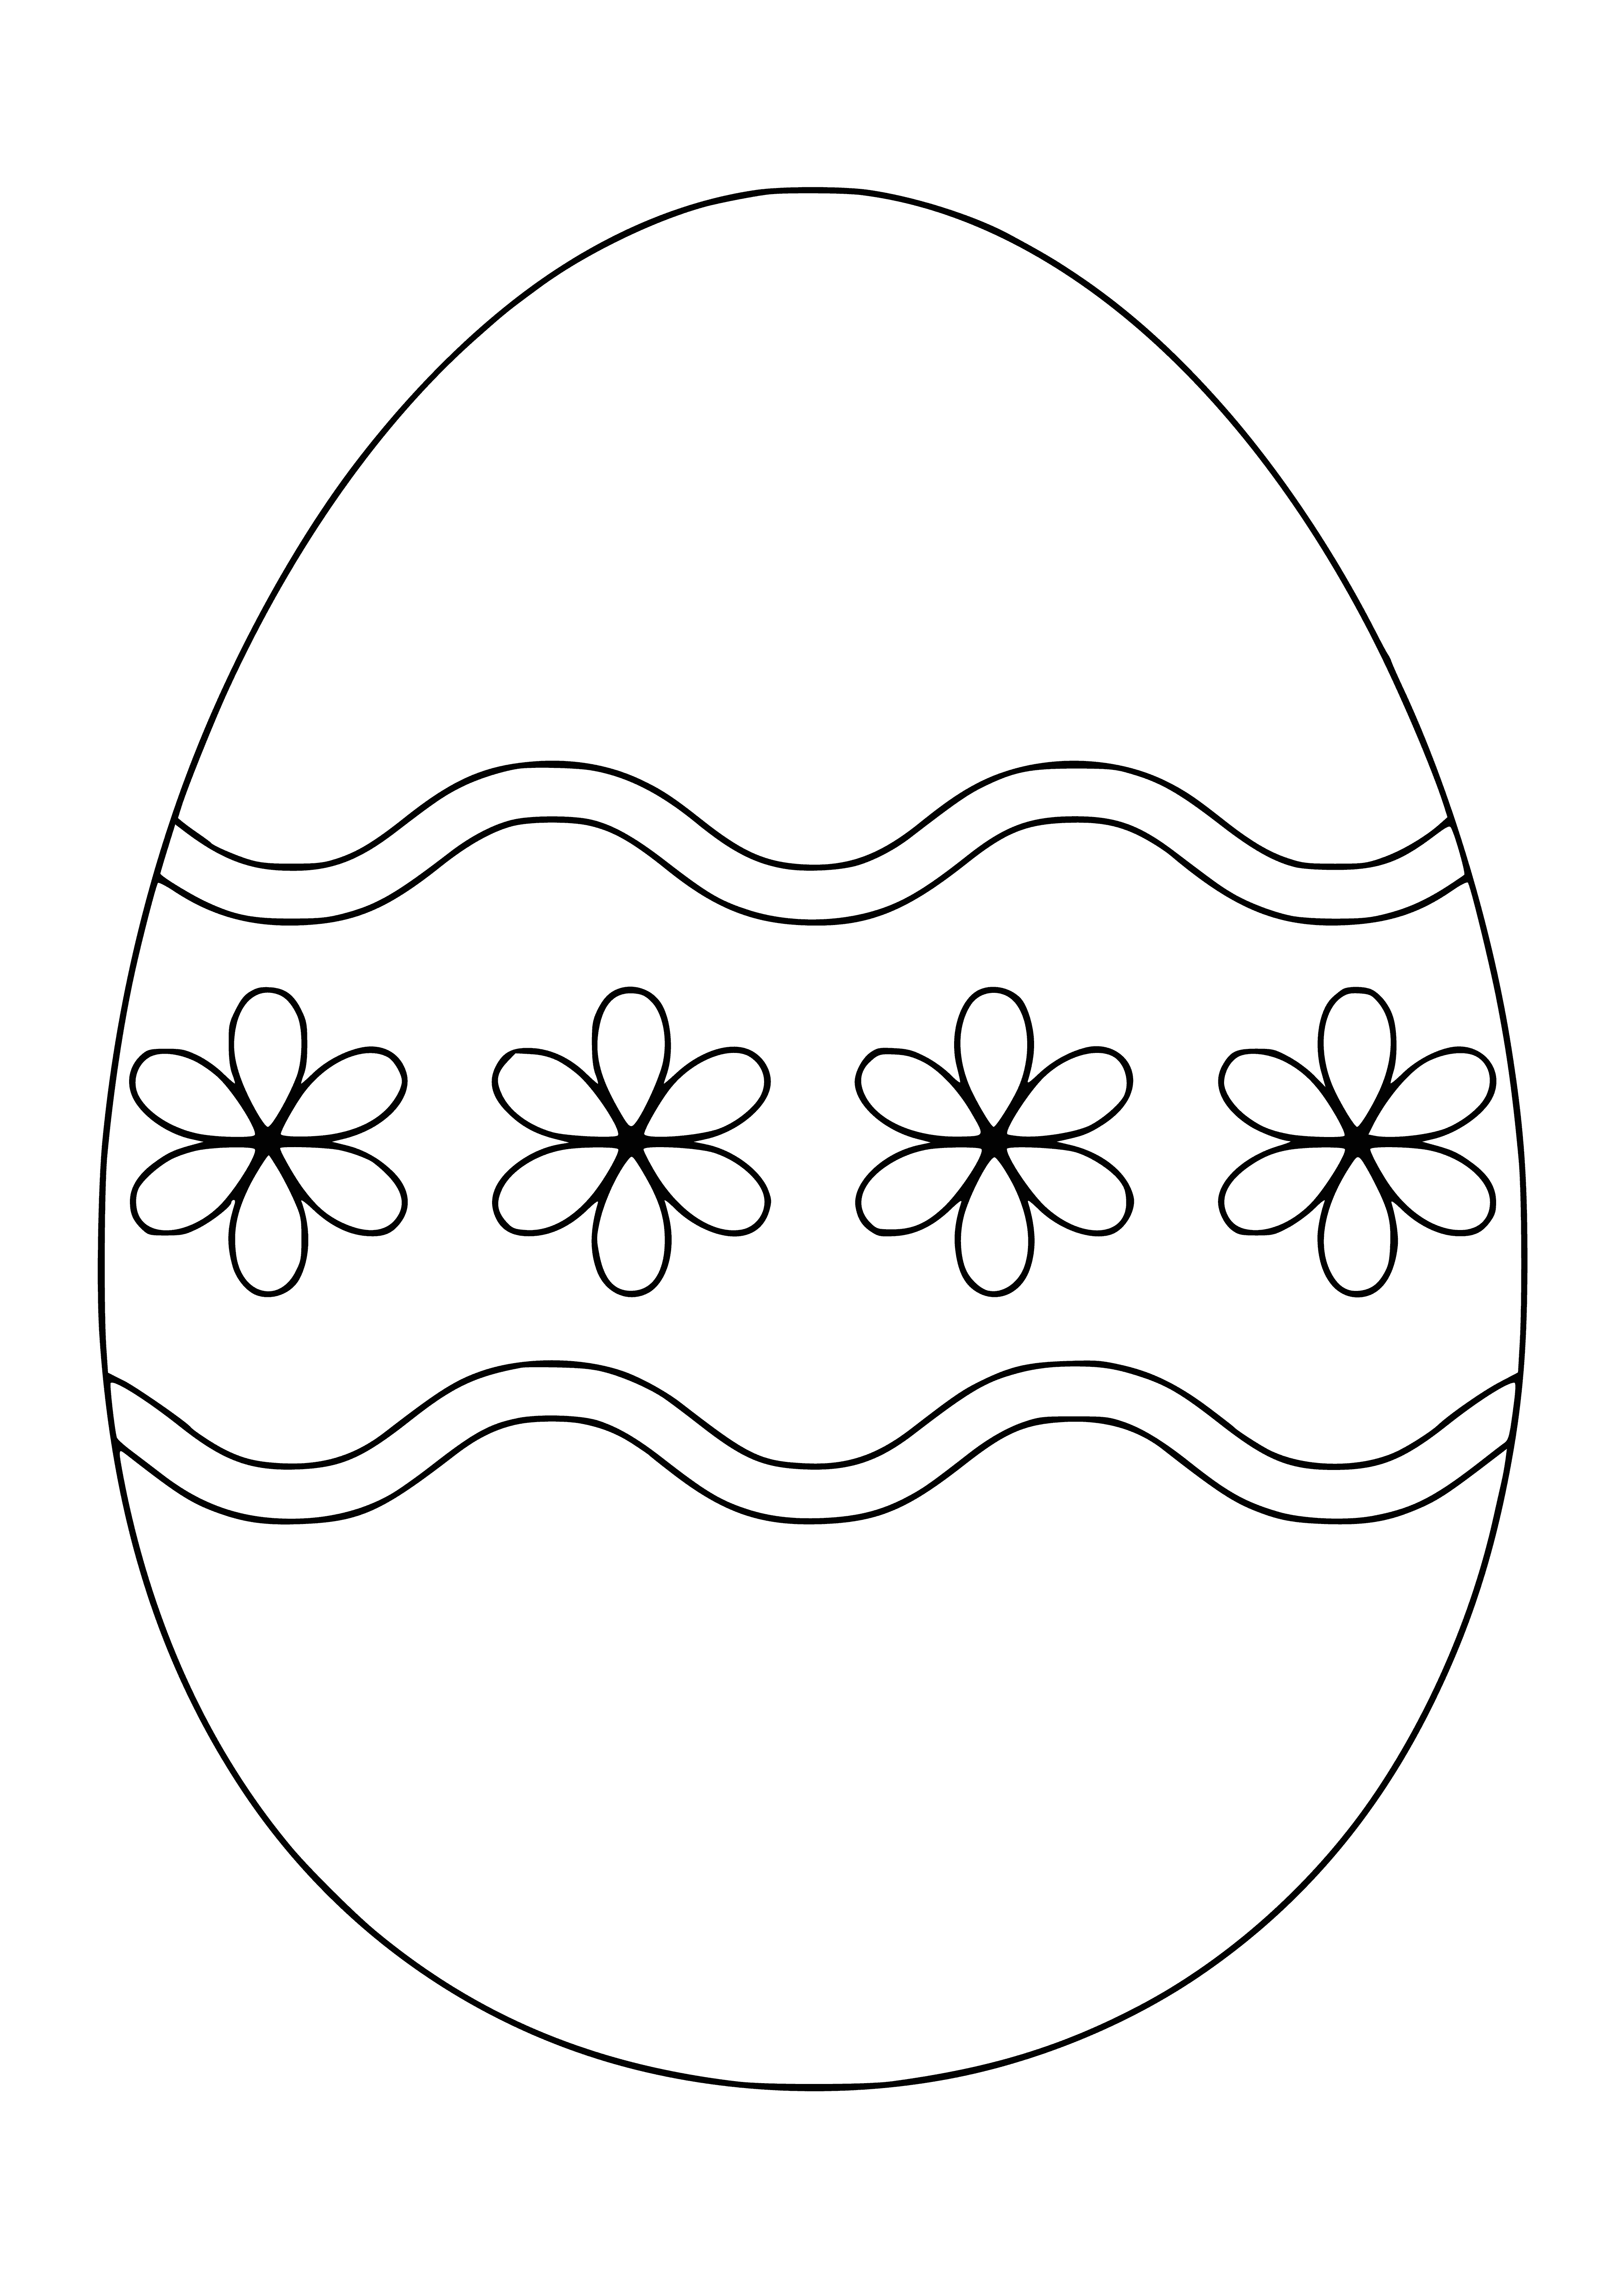 coloring page: #easter #coloring
3 Easter eggs in a basket - 2 blue, 1 green - to color this #Easter! #coloring